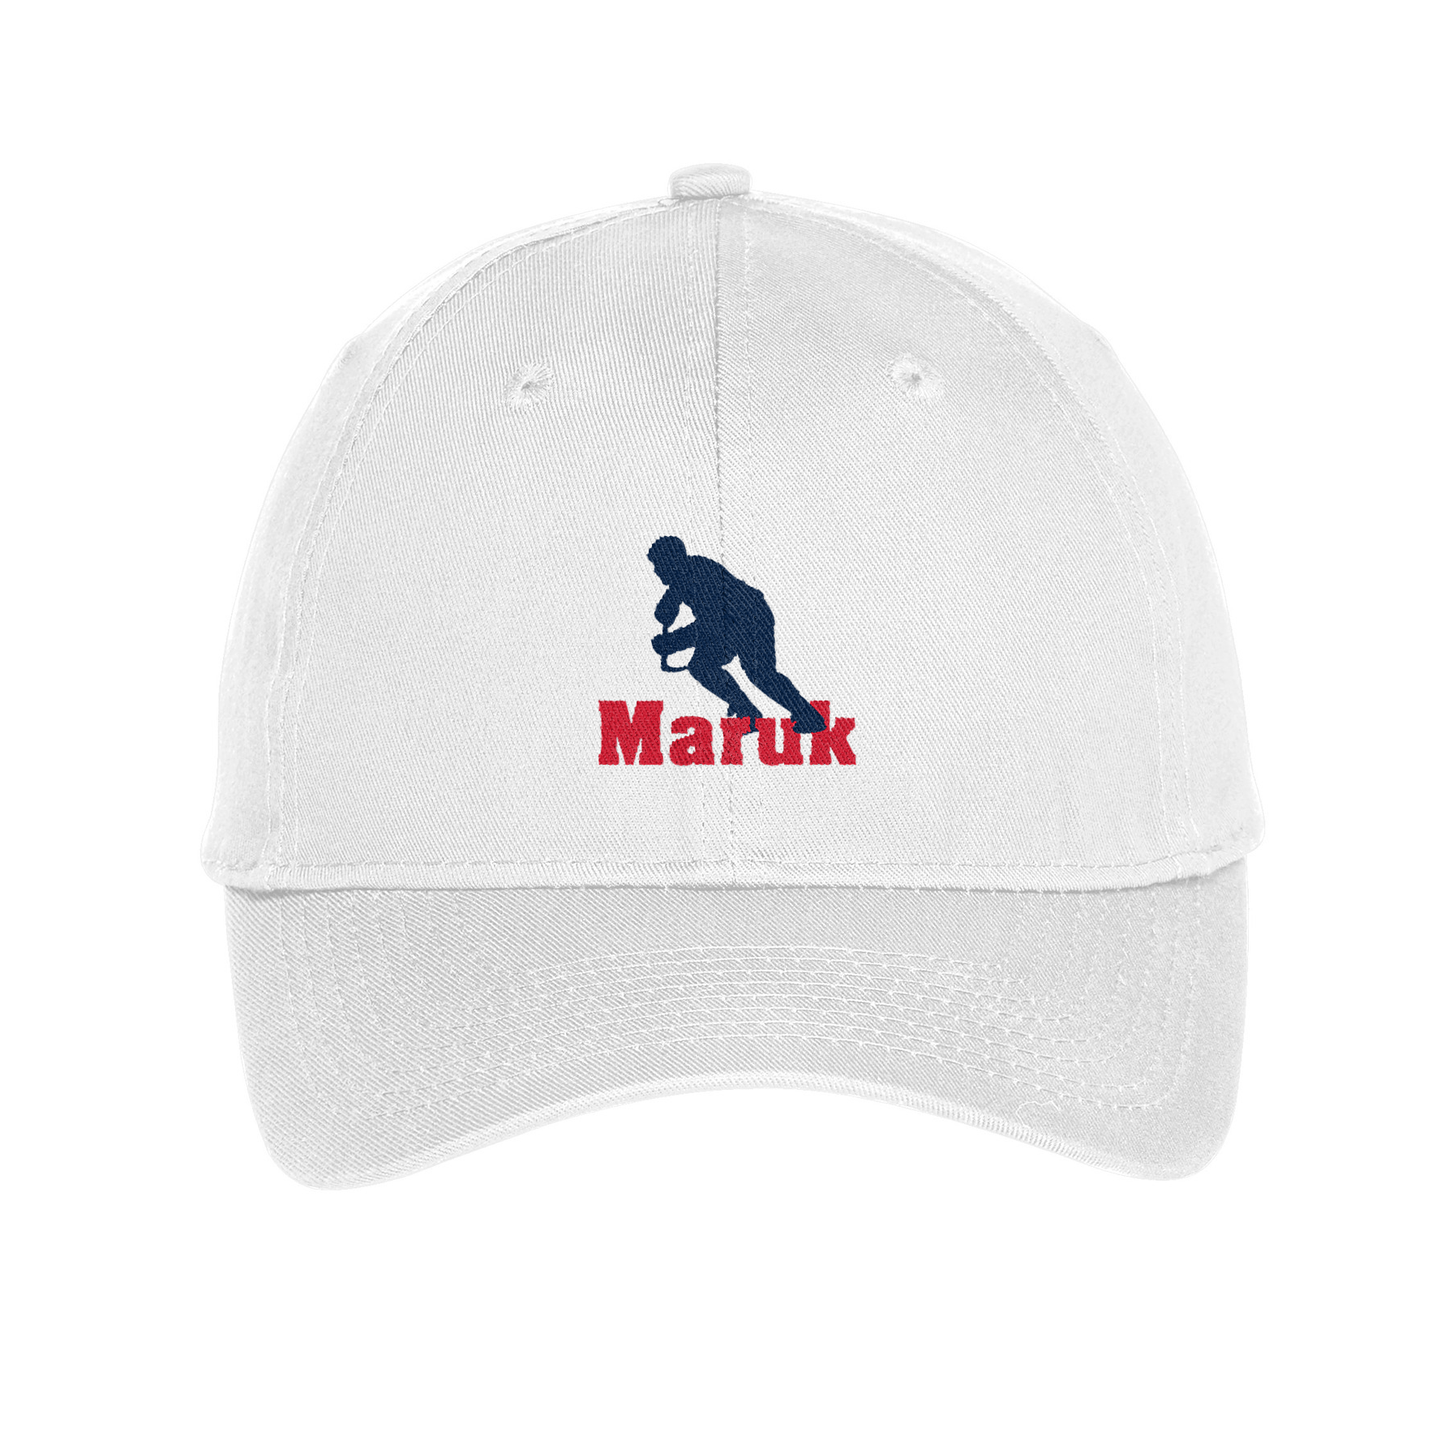 GT Maruk Embroidered Twill Cap